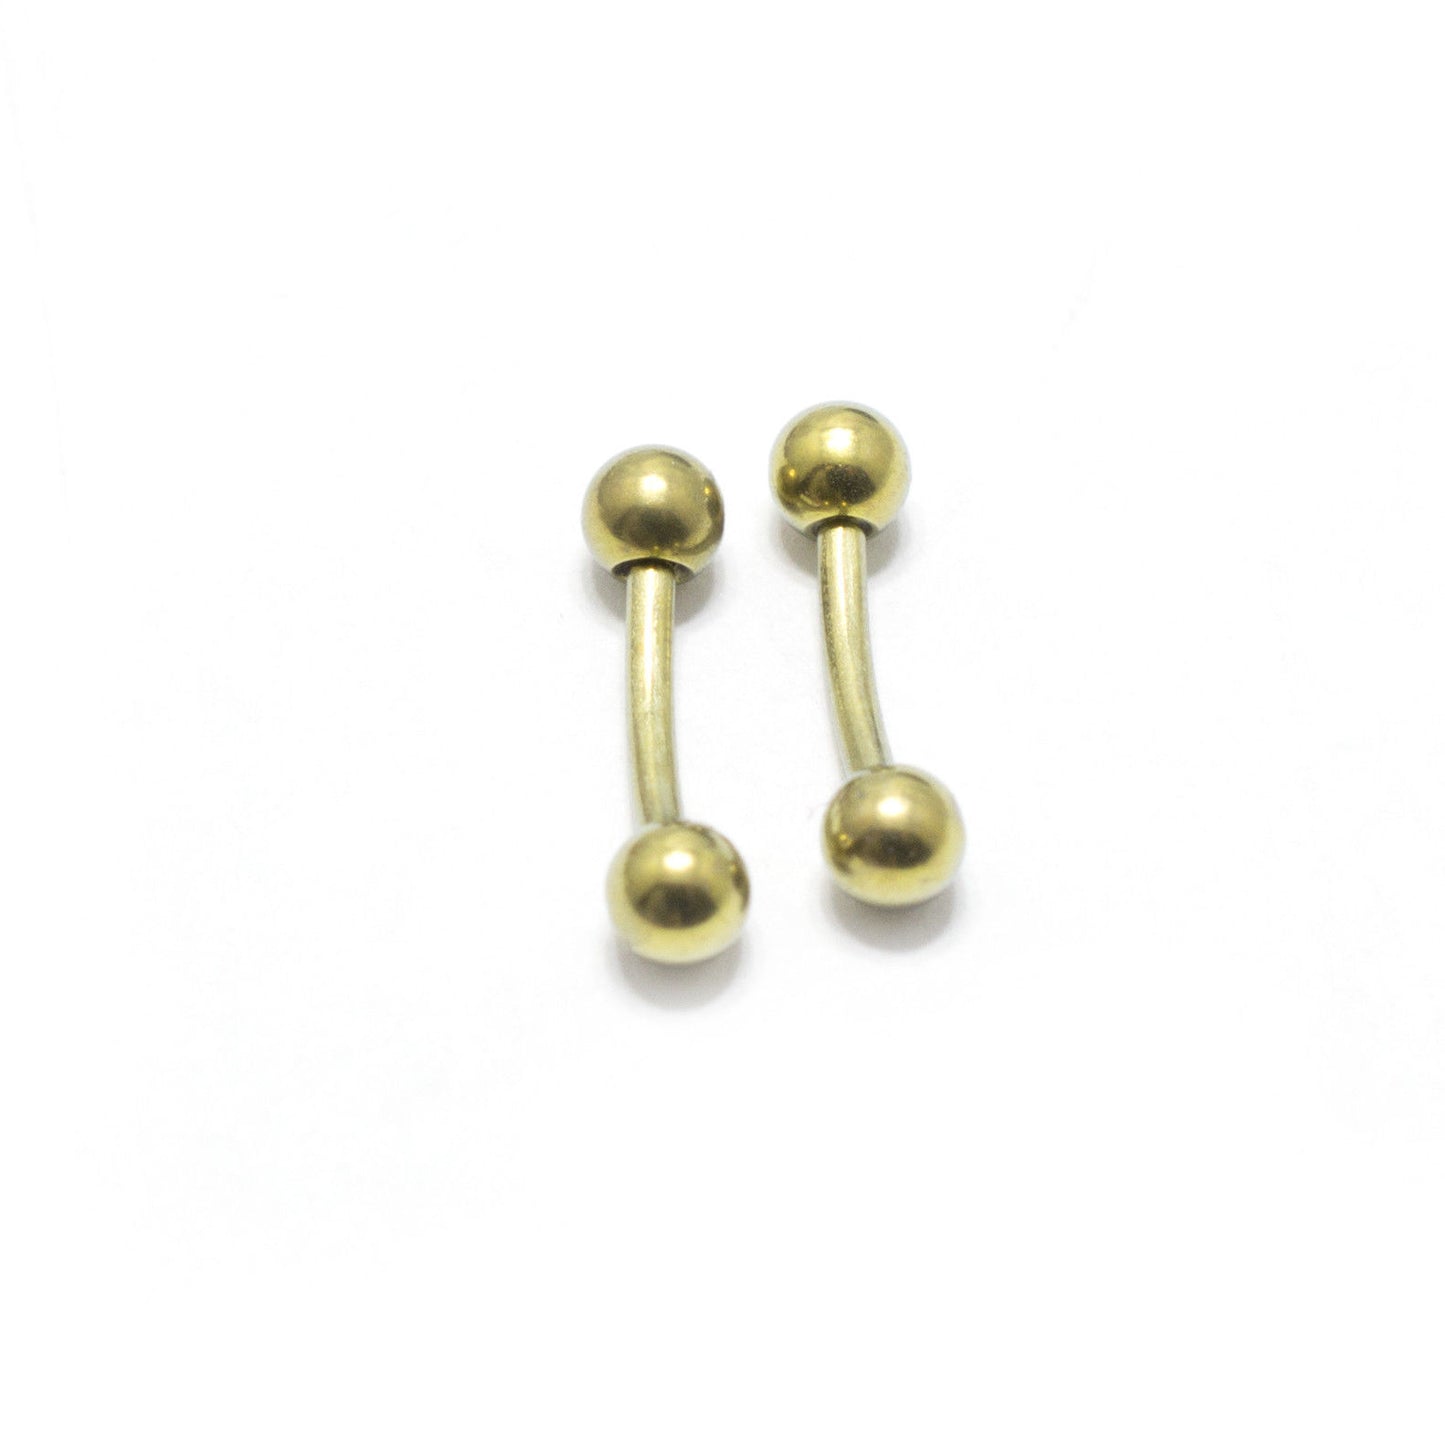 Pair of Curved Barbells Micro Size 16G - 1/4" w/ 3mm Ball Eyebrow Rook Tragus